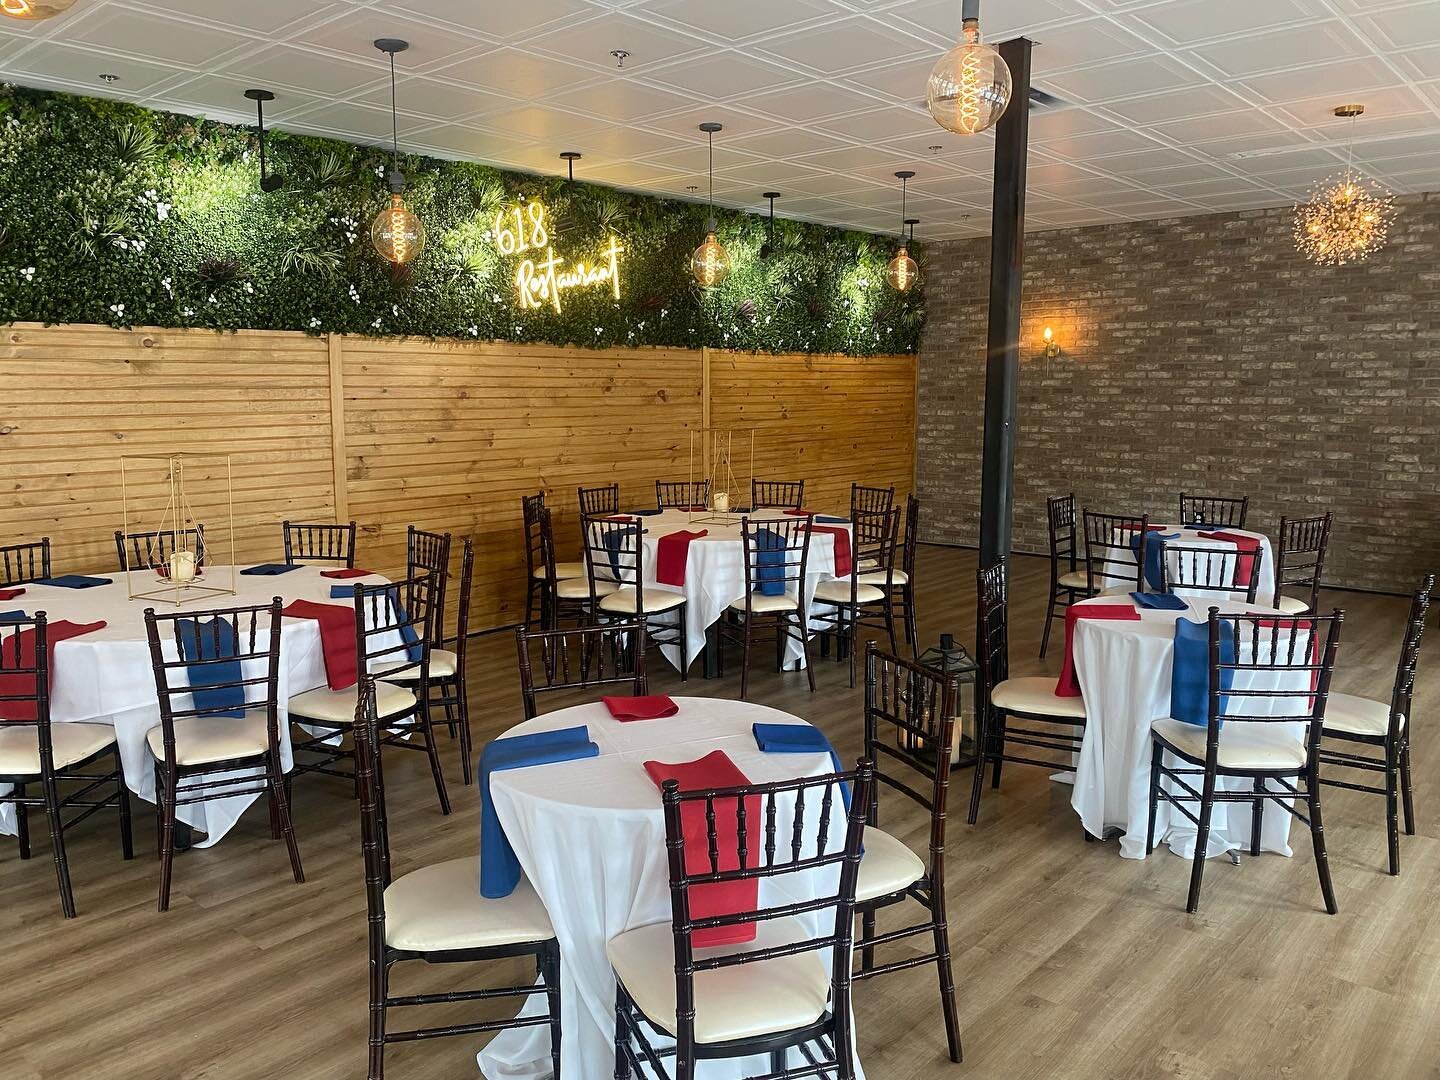 Say 👋🏻 to THE OAK ROOM

The Oak Room is a perfectly cozy and private space complete with starburst lighting, greenery, wood &amp; brick.  It's a even includes a rich, dramatic backdrop for any event.  Want to rent our flower wall or wedding arbor? 